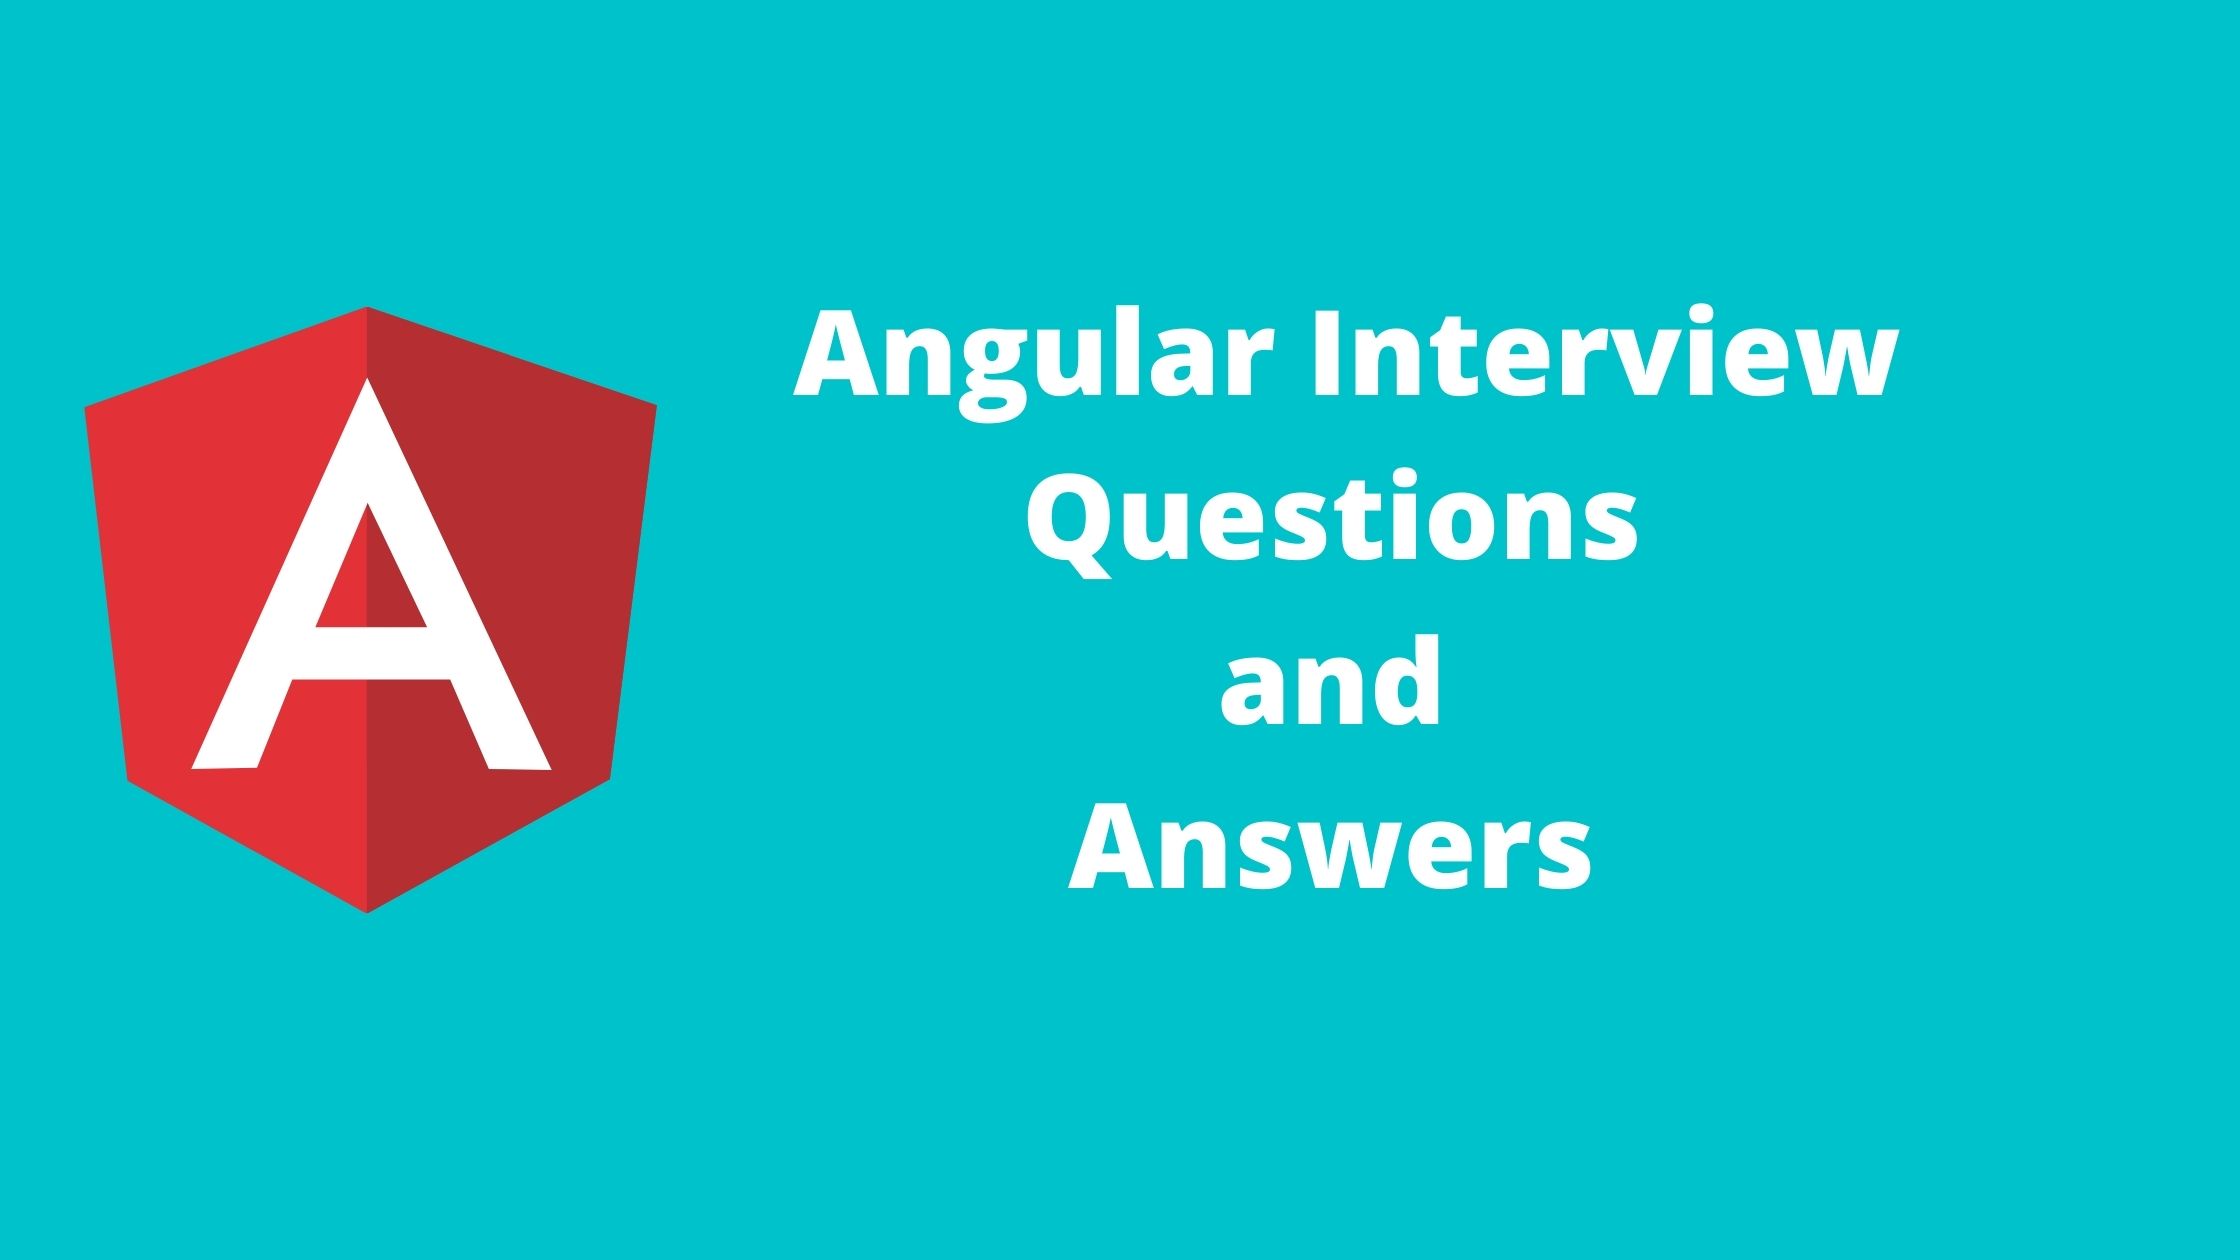 Angular Interview Questions and Answers